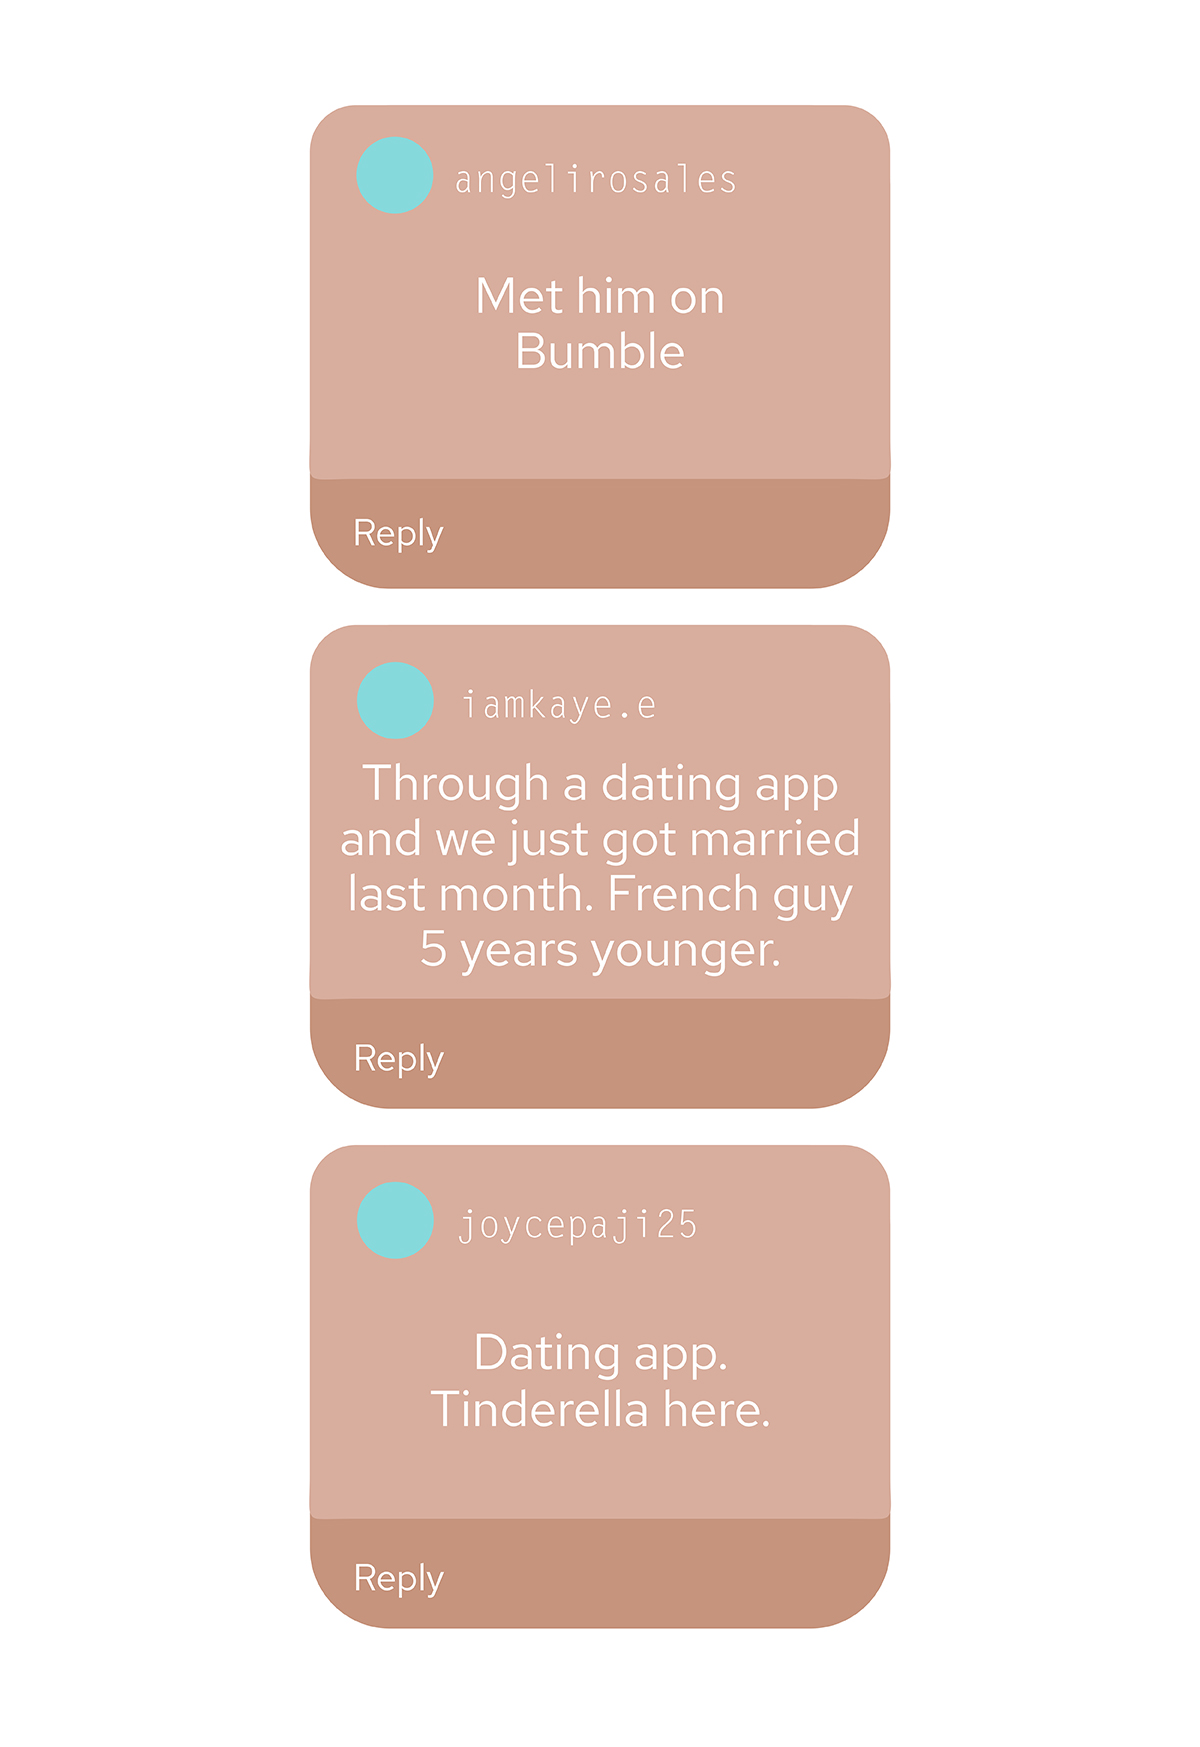 "Met him on Bumble" (angelirosales) "Through a dating app and we just go married last mont. French guy 5 years younger" (iamkaye.e) "Dating app. Tinderella here" (joycepaji25)